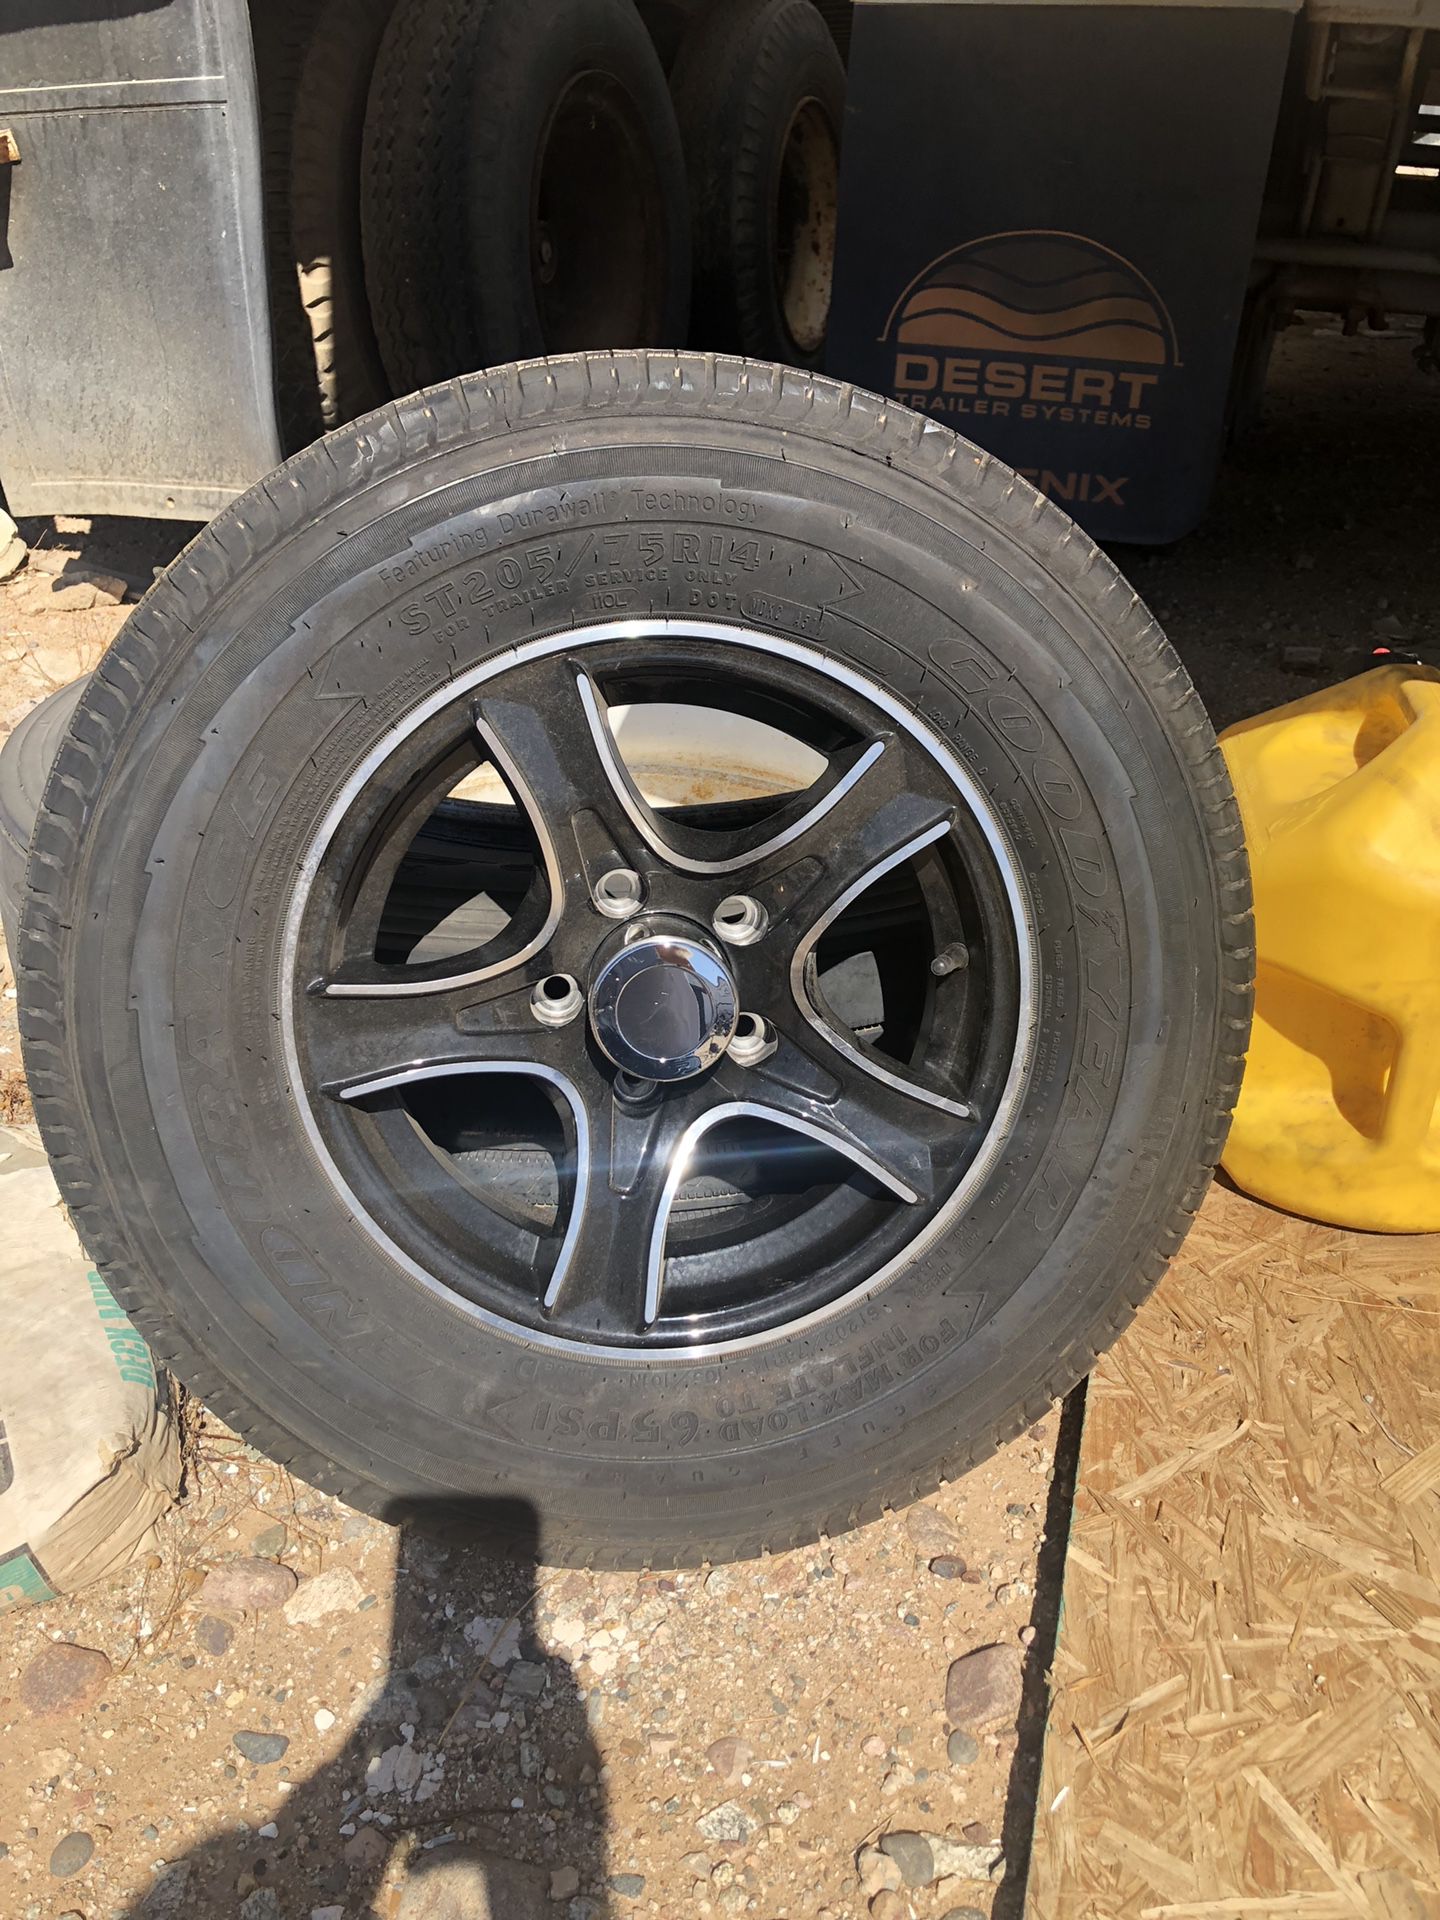 Brand new set of 5 rims and tires 205.75.14 Goodyear load D trailer lug nuts and center cap included